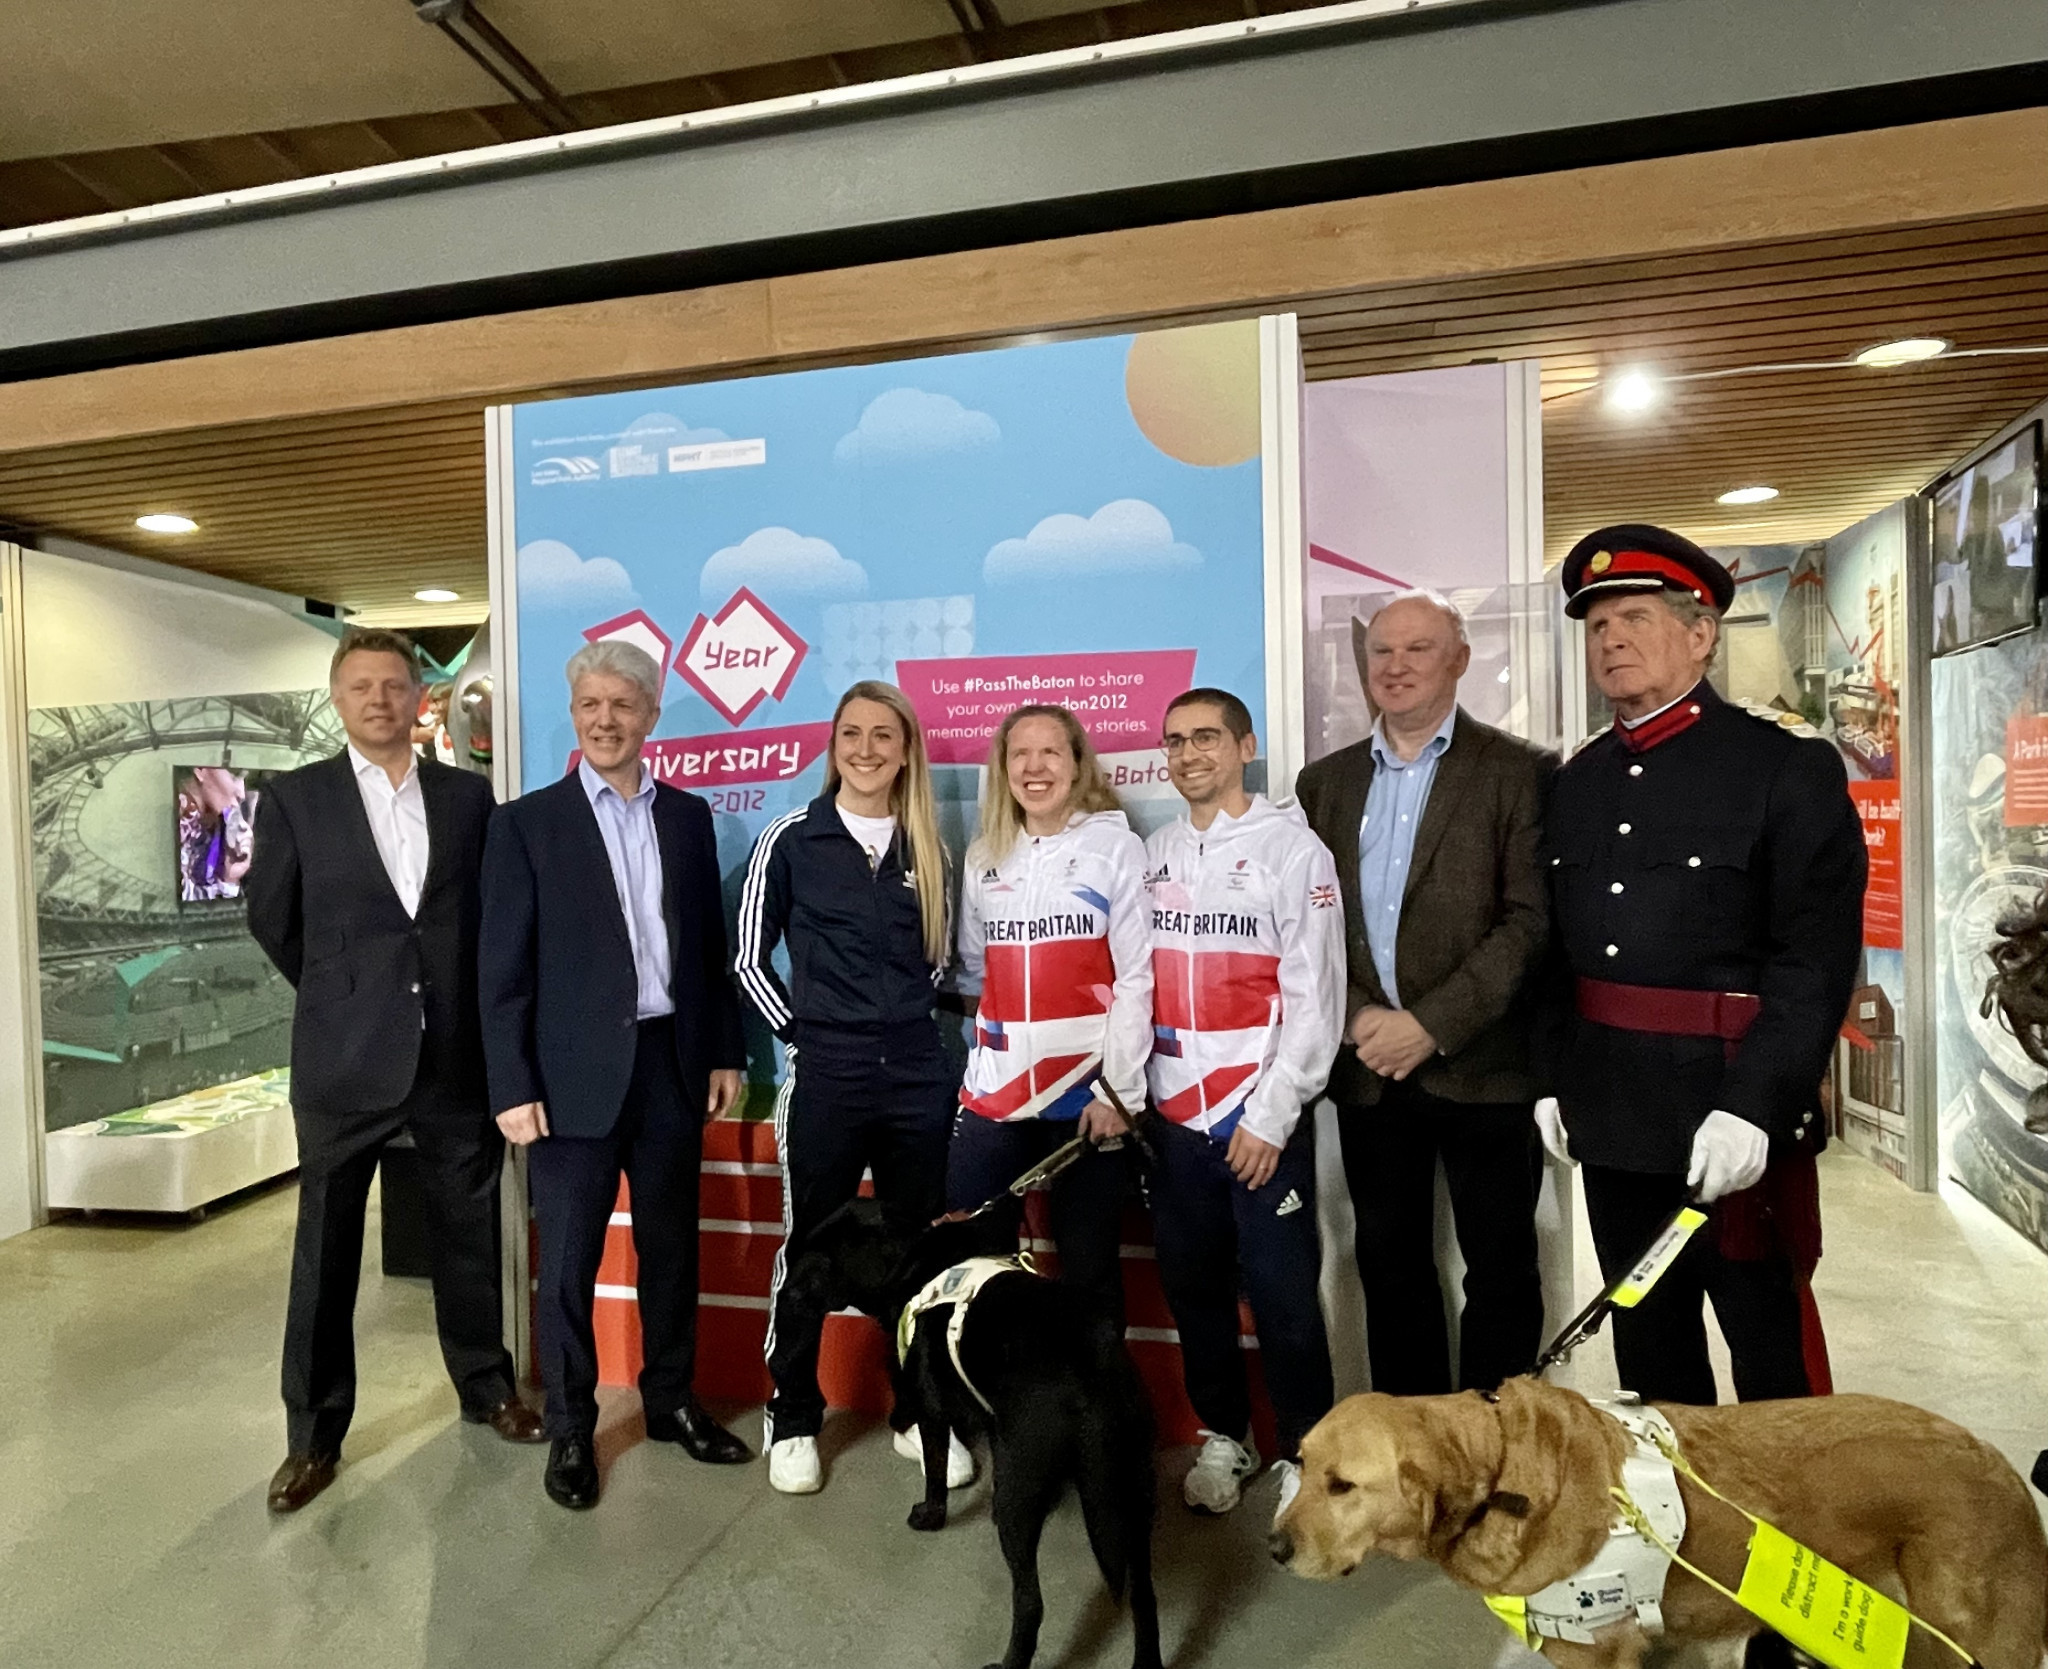 British Olympic and Paralympic athletes helped to officially open a new exhibition showcasing the legacy of London 2012 at the Lee Valley VeloPark ©ITG